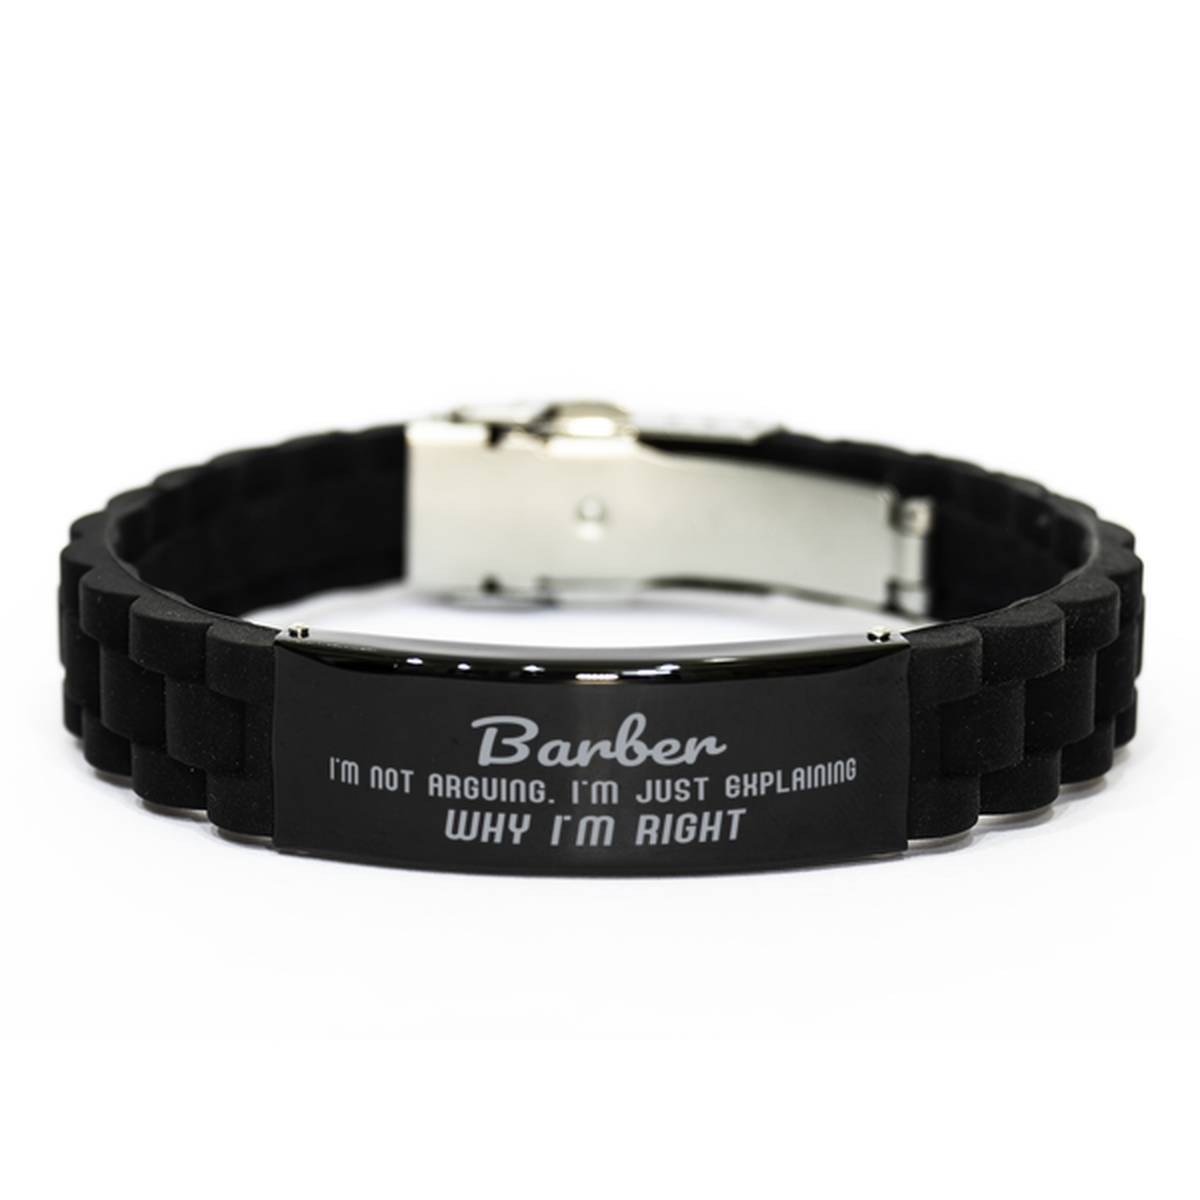 Barber I'm not Arguing. I'm Just Explaining Why I'm RIGHT Black Glidelock Clasp Bracelet, Funny Saying Quote Barber Gifts For Barber Graduation Birthday Christmas Gifts for Men Women Coworker